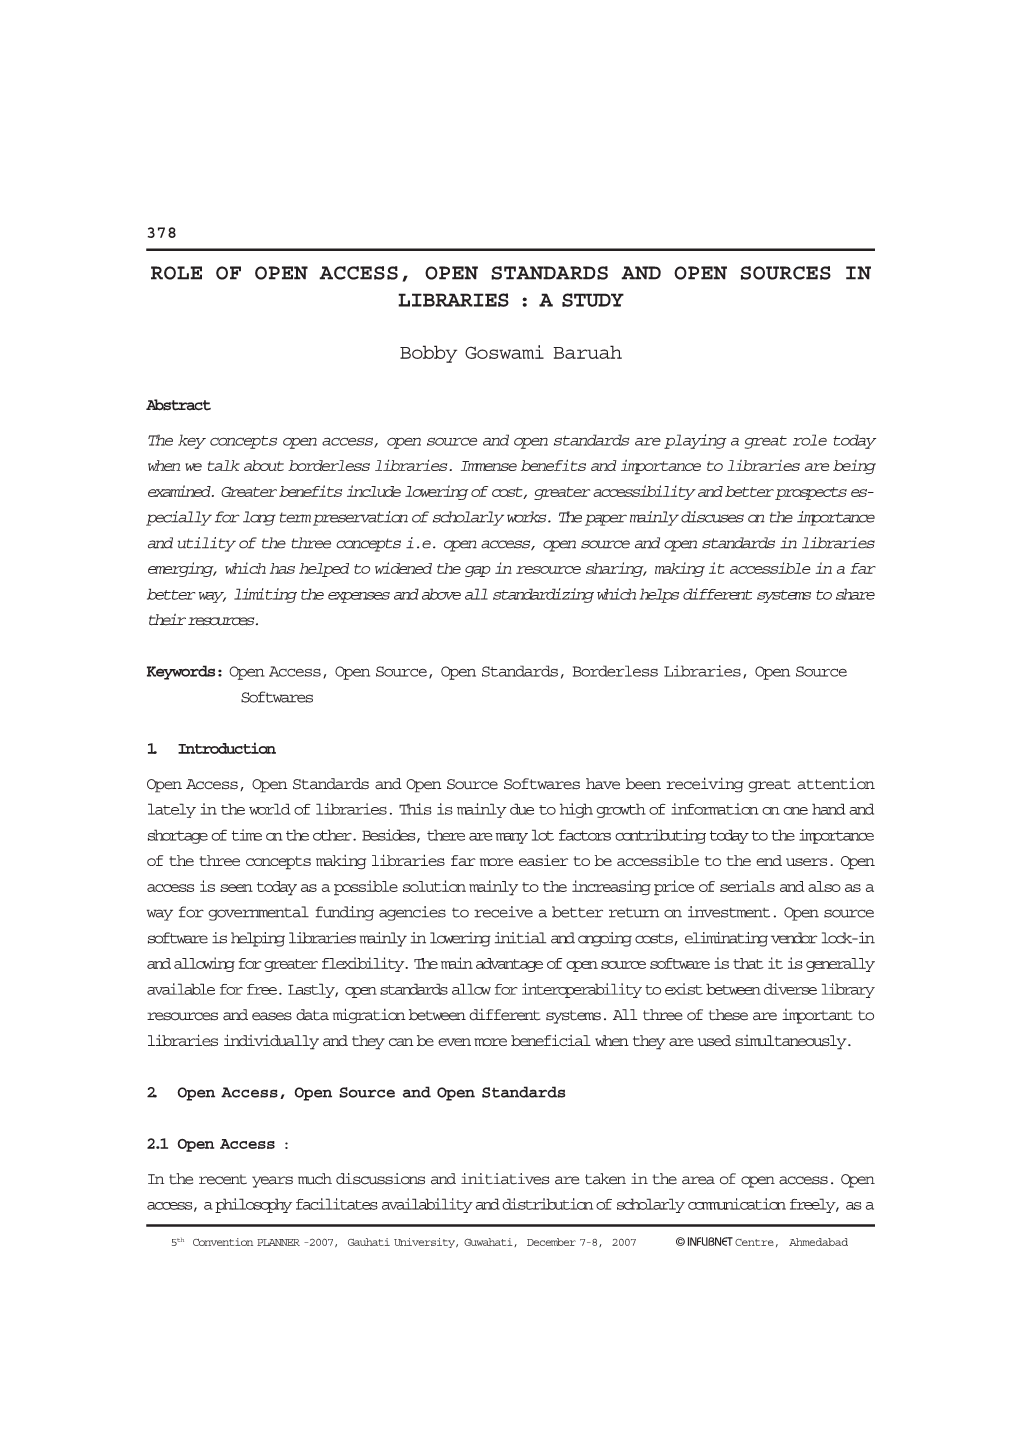 Role of Open Access, Open Standards and Open Sources in Libraries : a Study